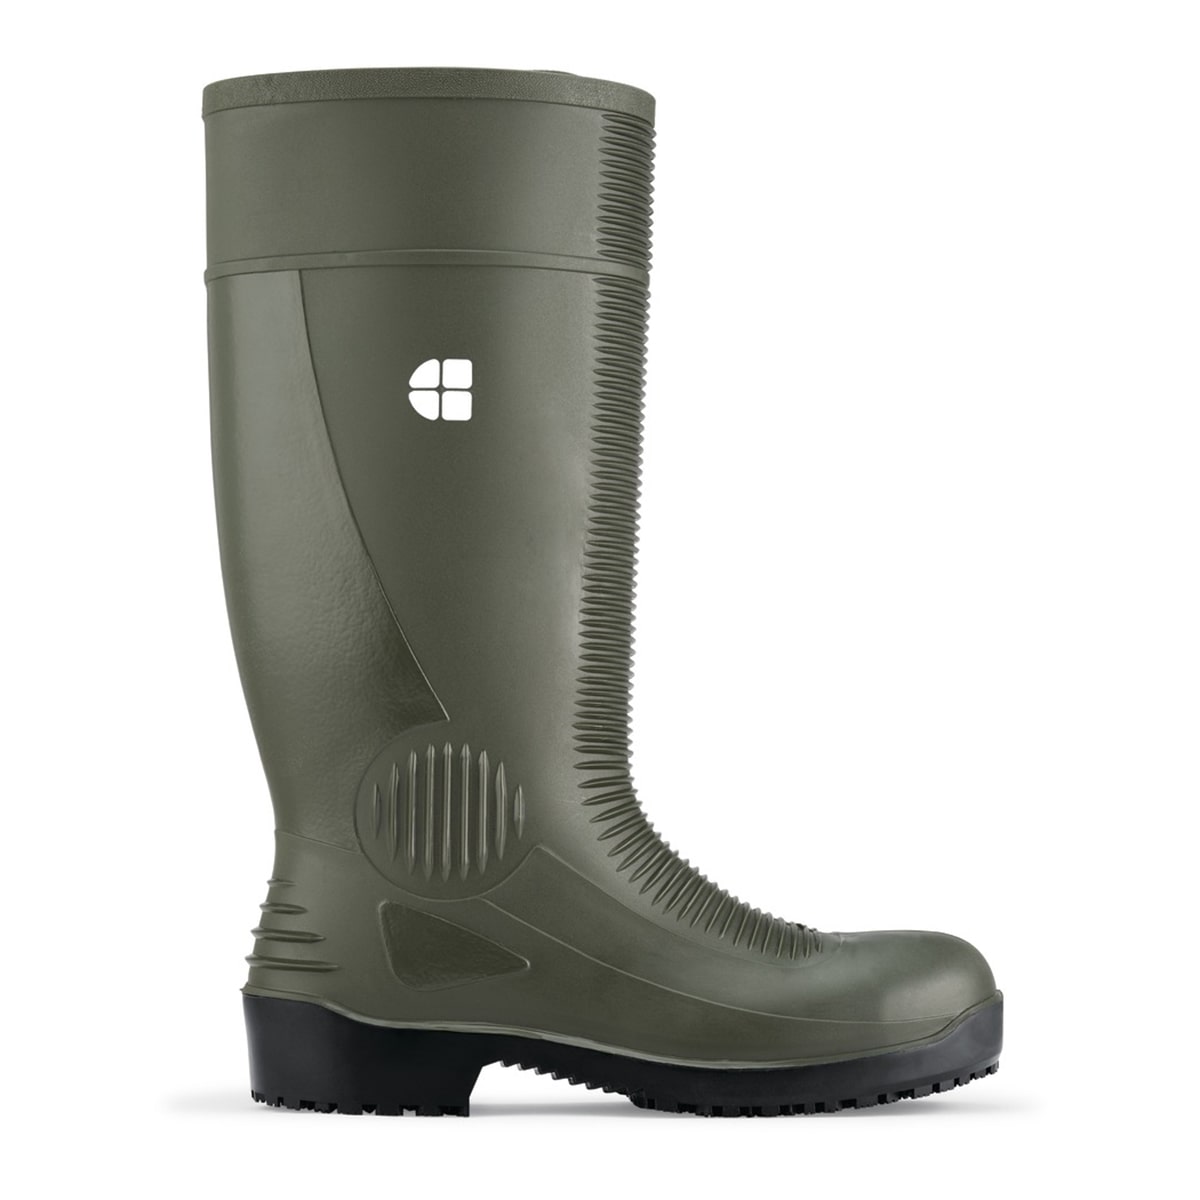 Slip resistant green wellington boot with steel toe cap (200 Joules) and water resistant upper, seen from the right.